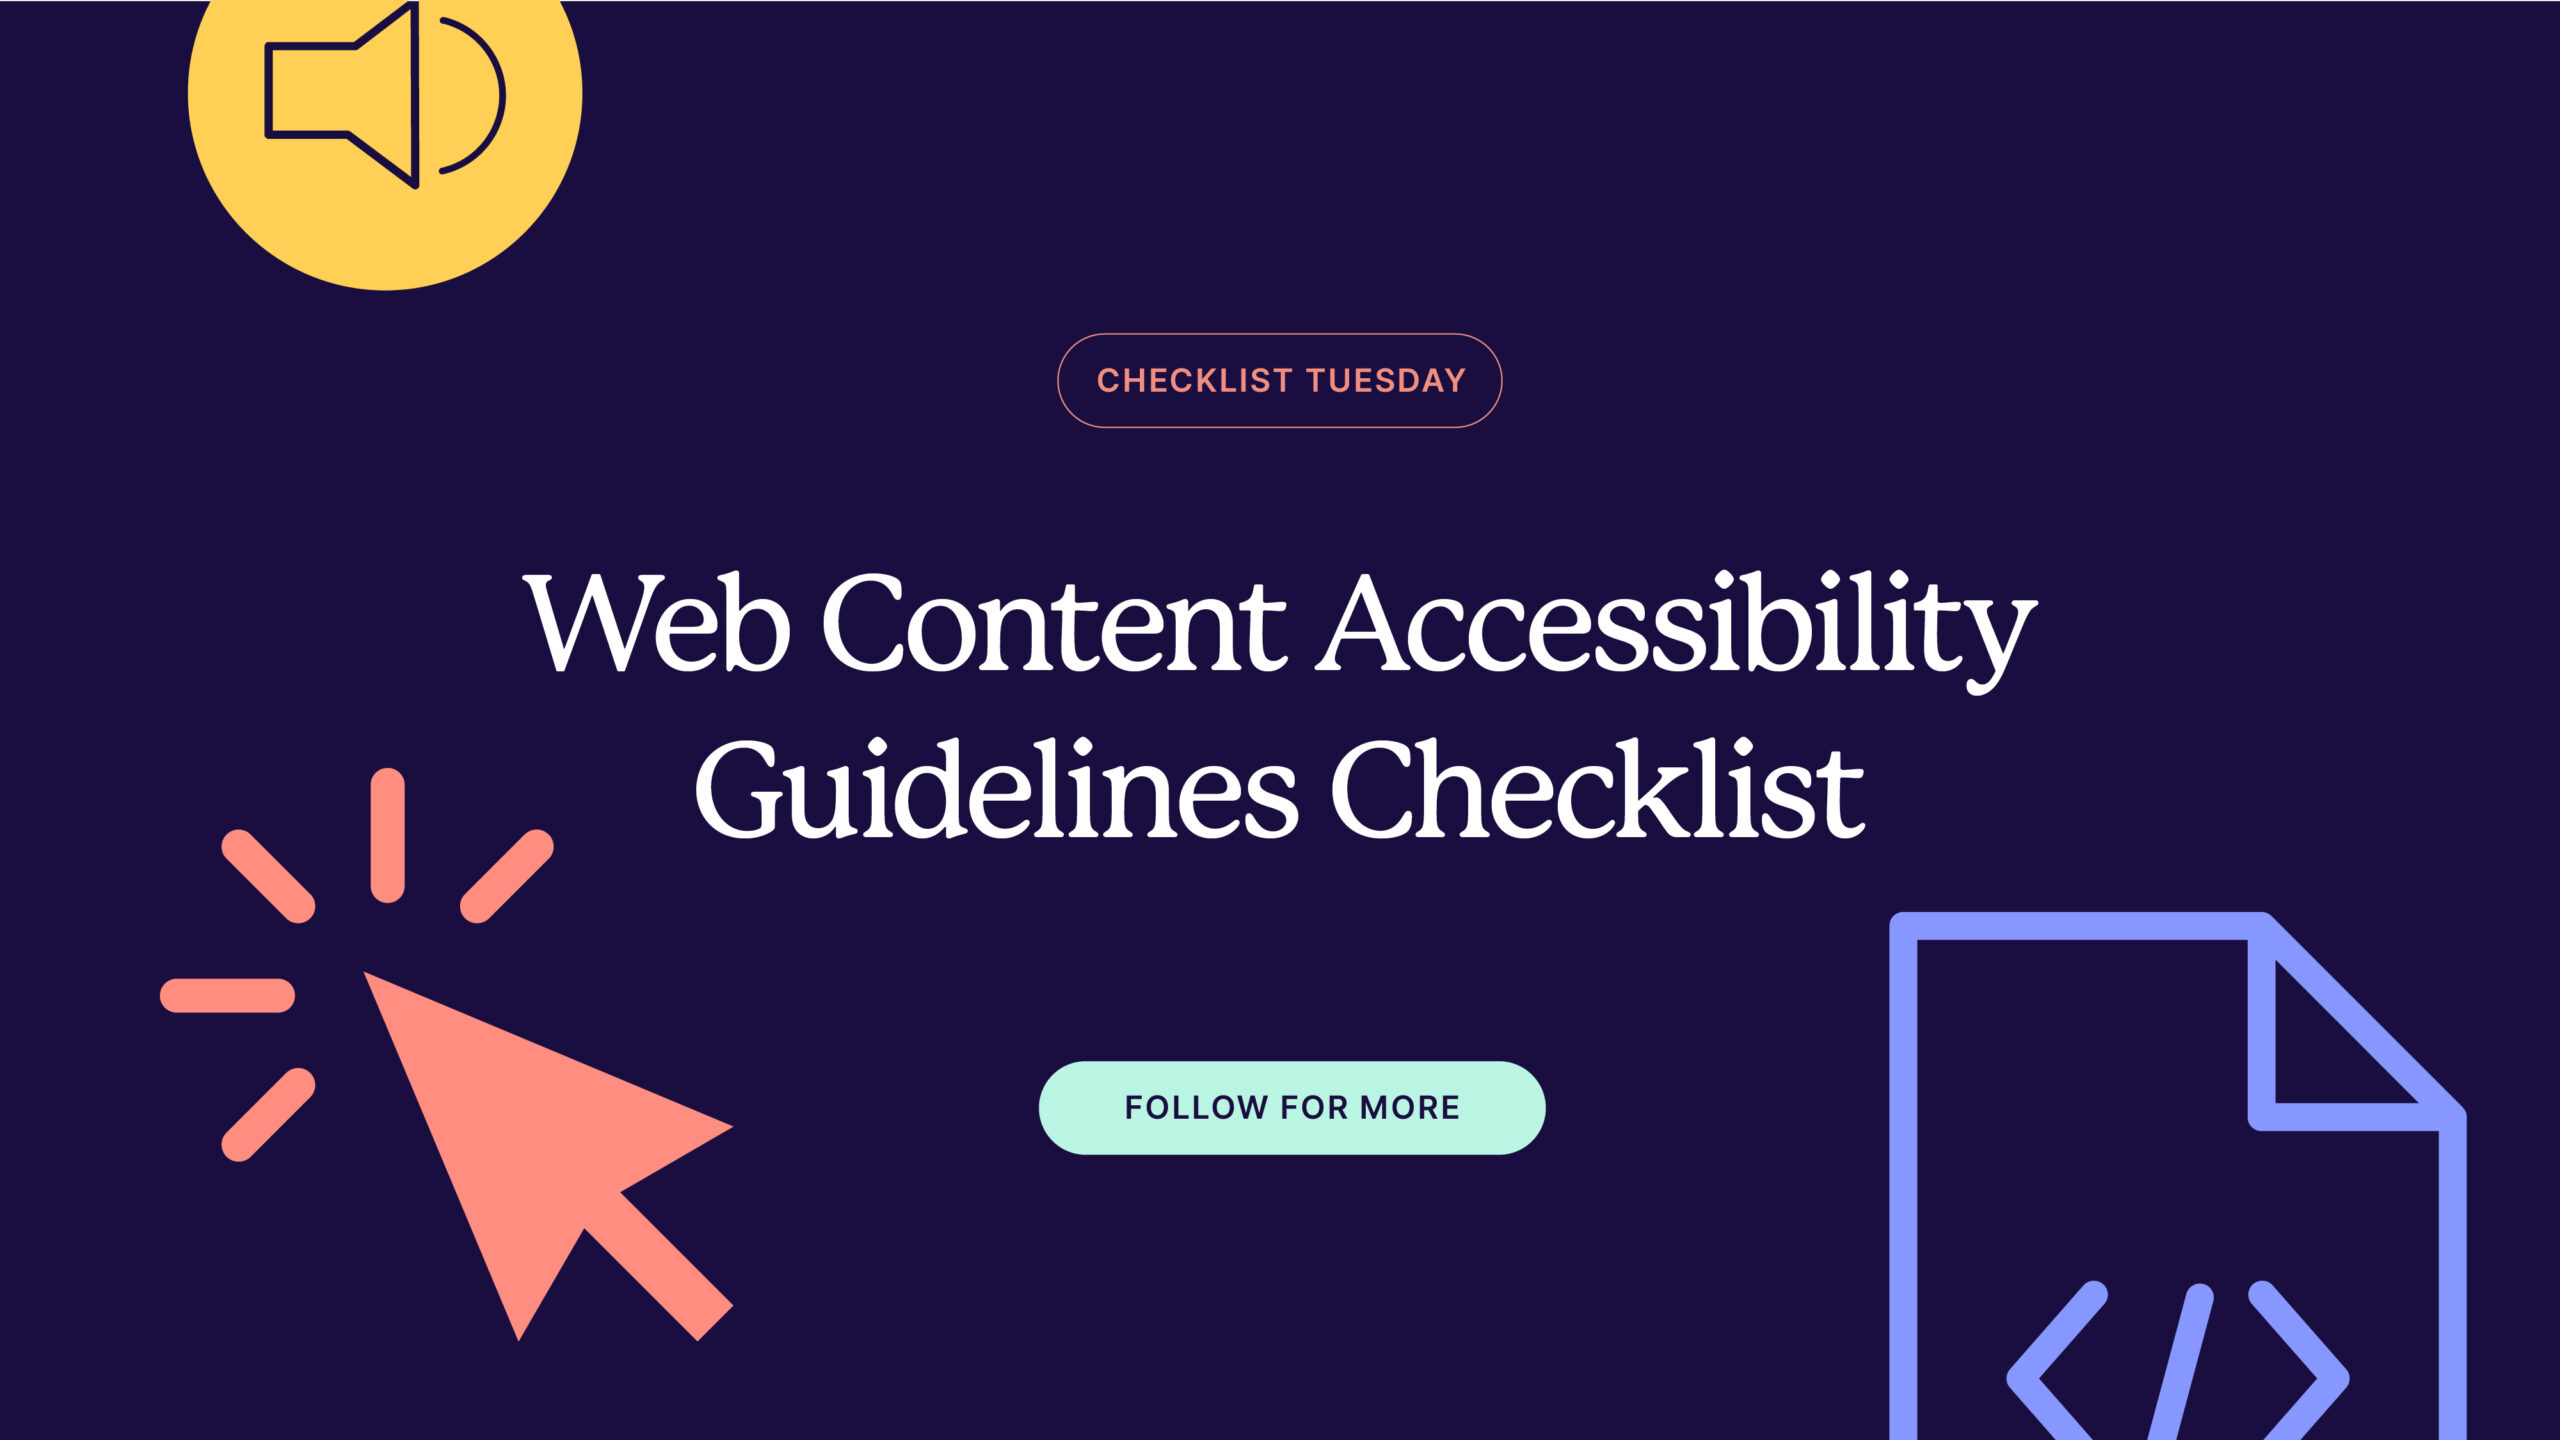 Web Content Accessibility Guidelines (WCAG) Checklist